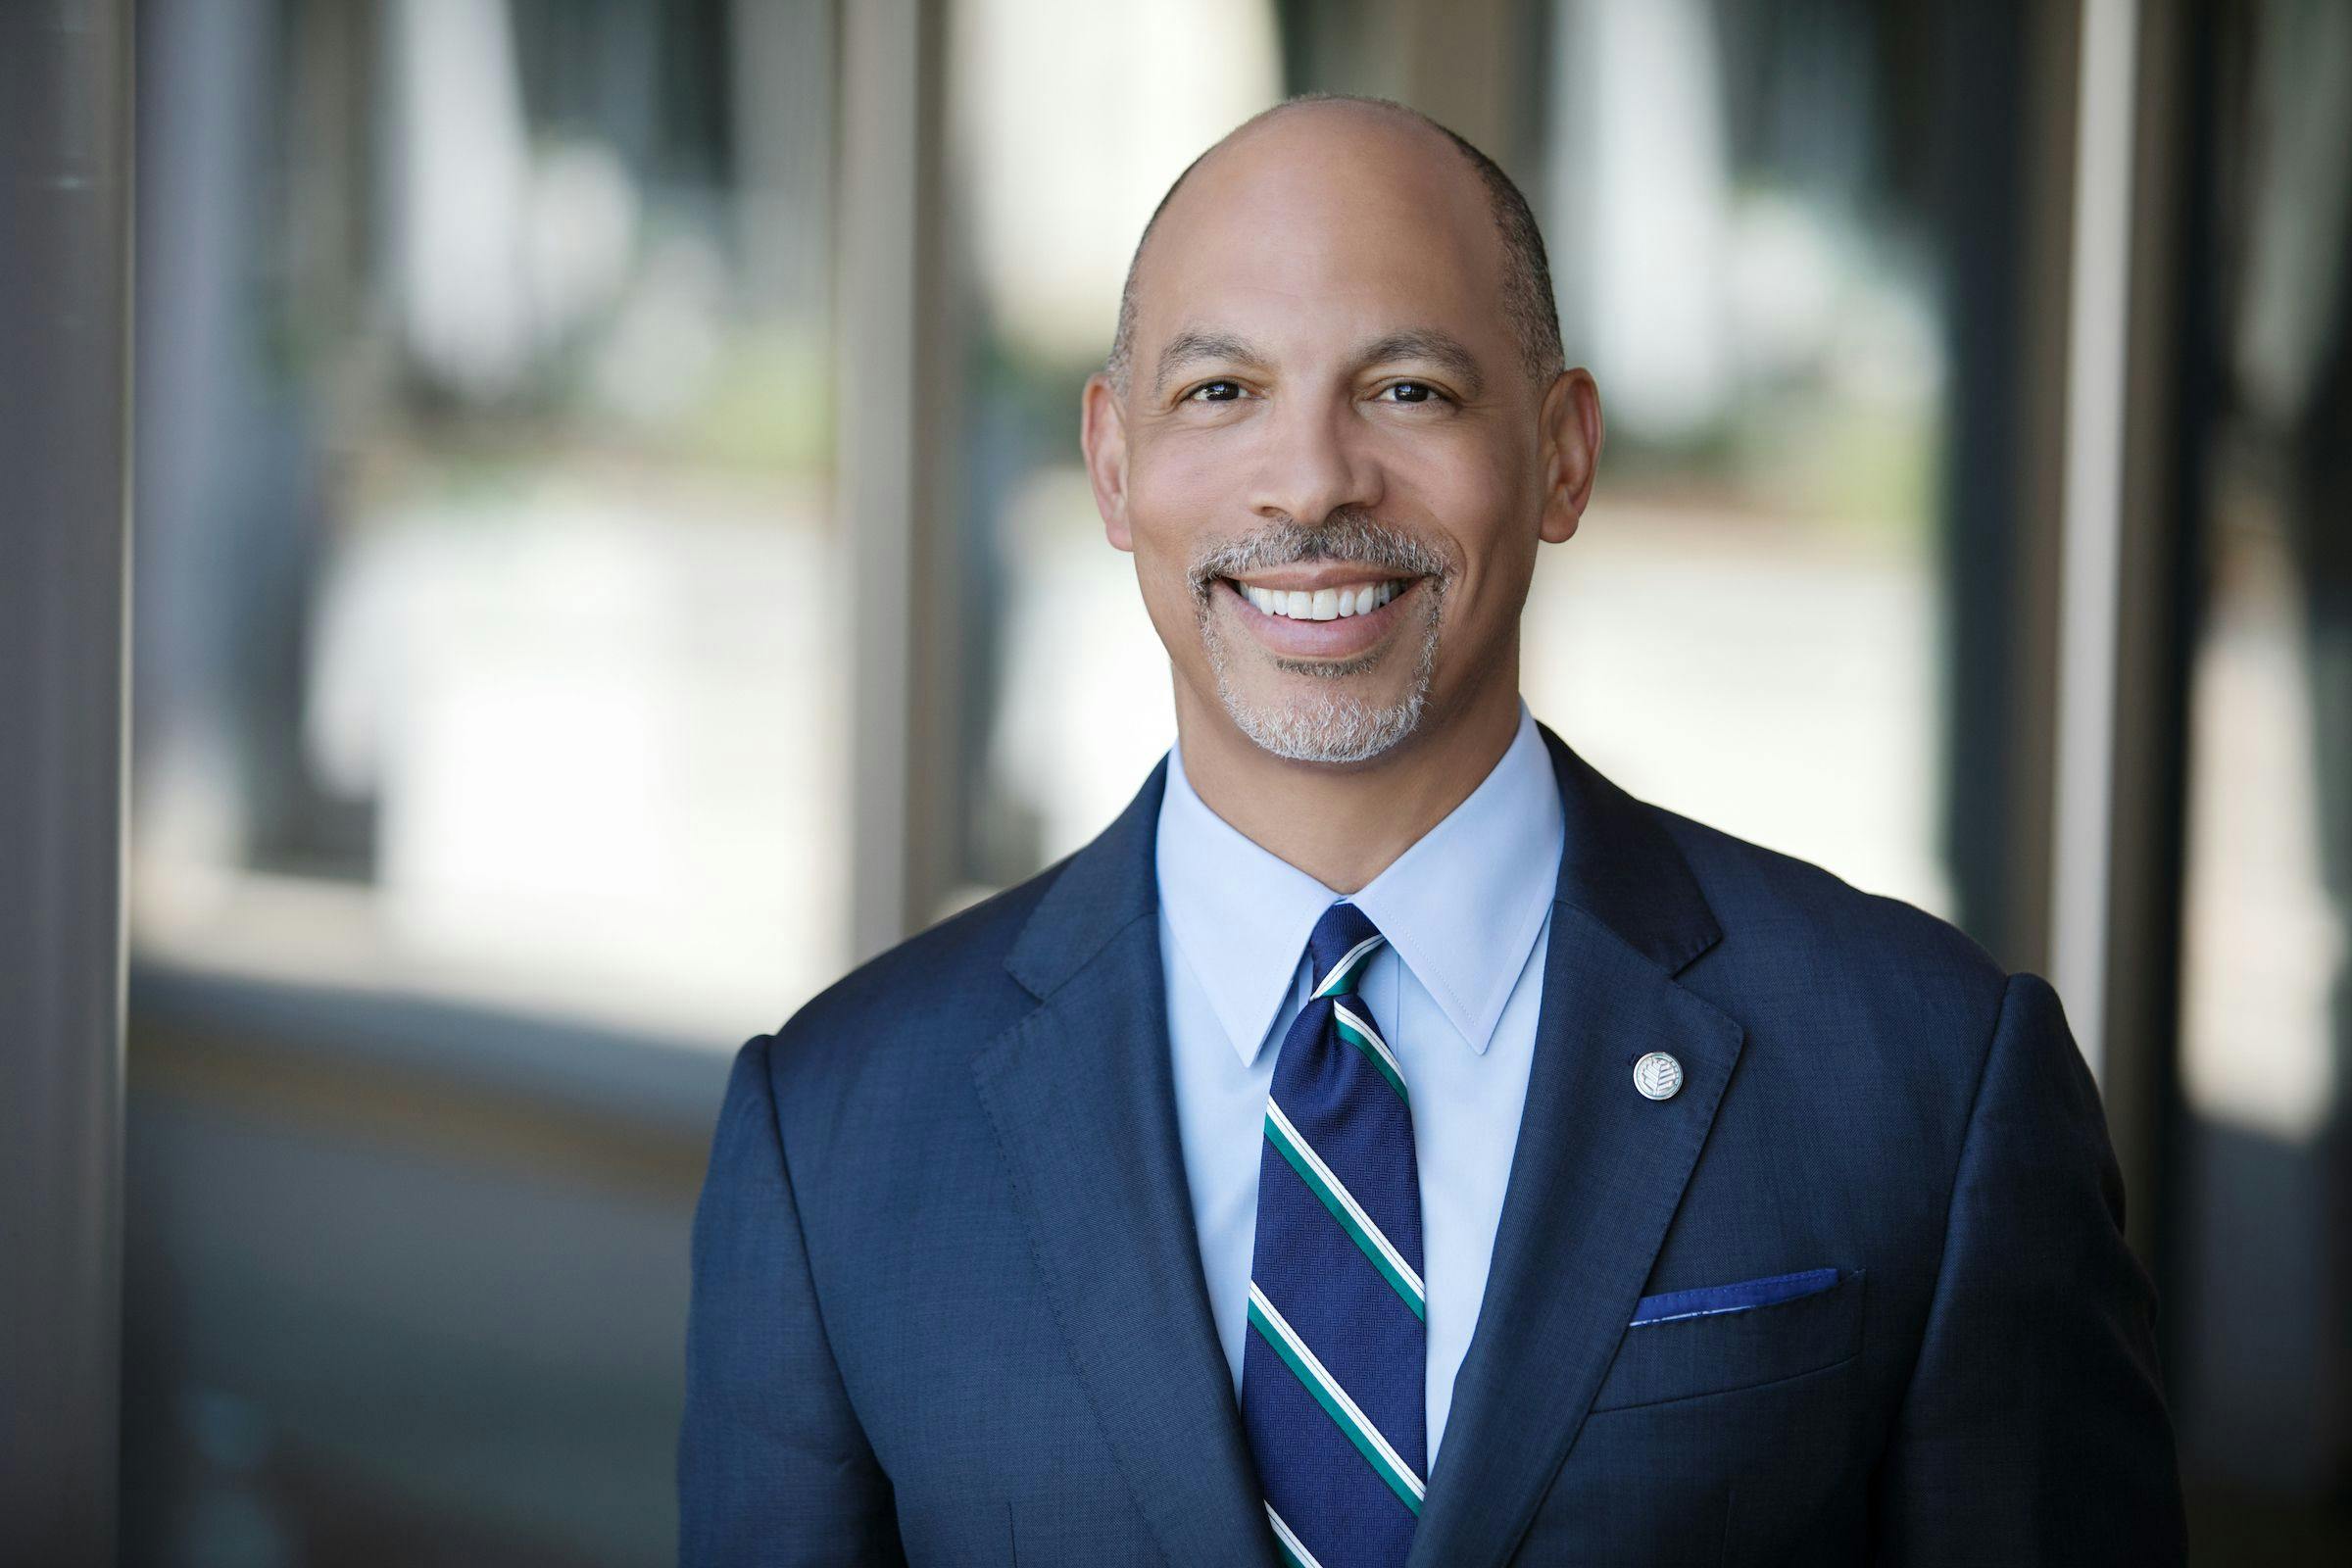 Eugene Woods, CEO of Atrium Health, becomes co-CEO of the new Advocate Health.